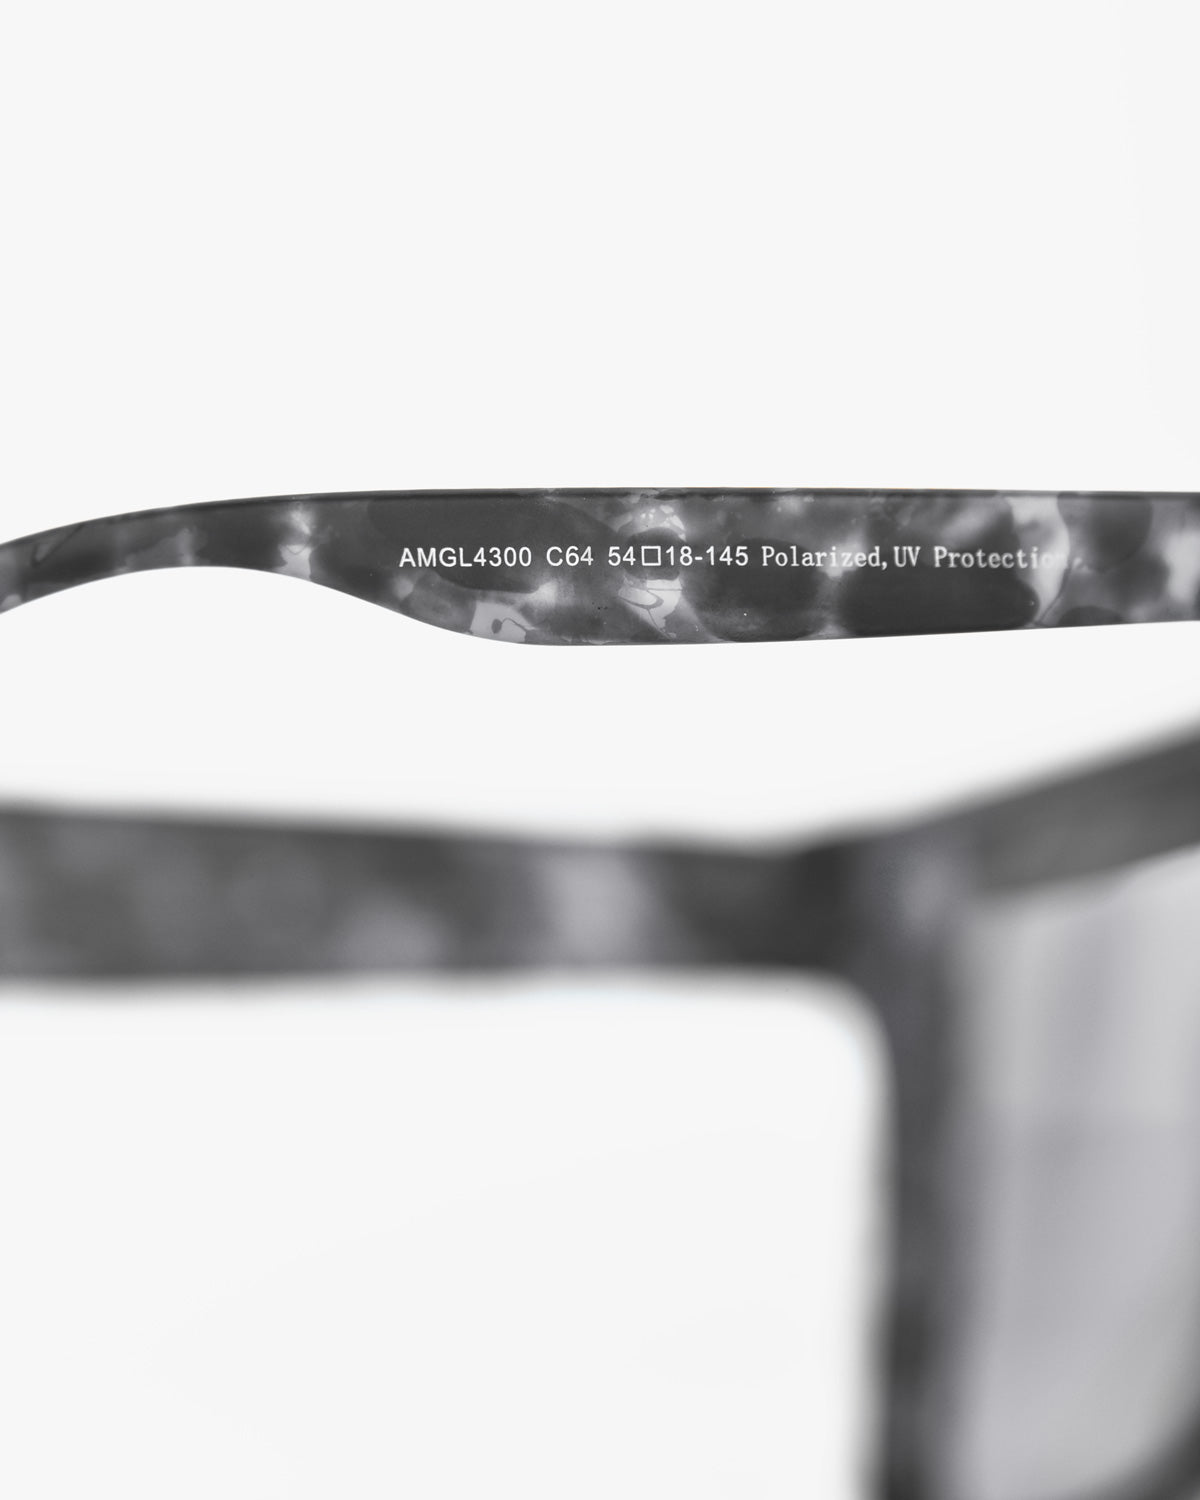 Marbled Charcoal Effect Sunglasses With Shaded Lens